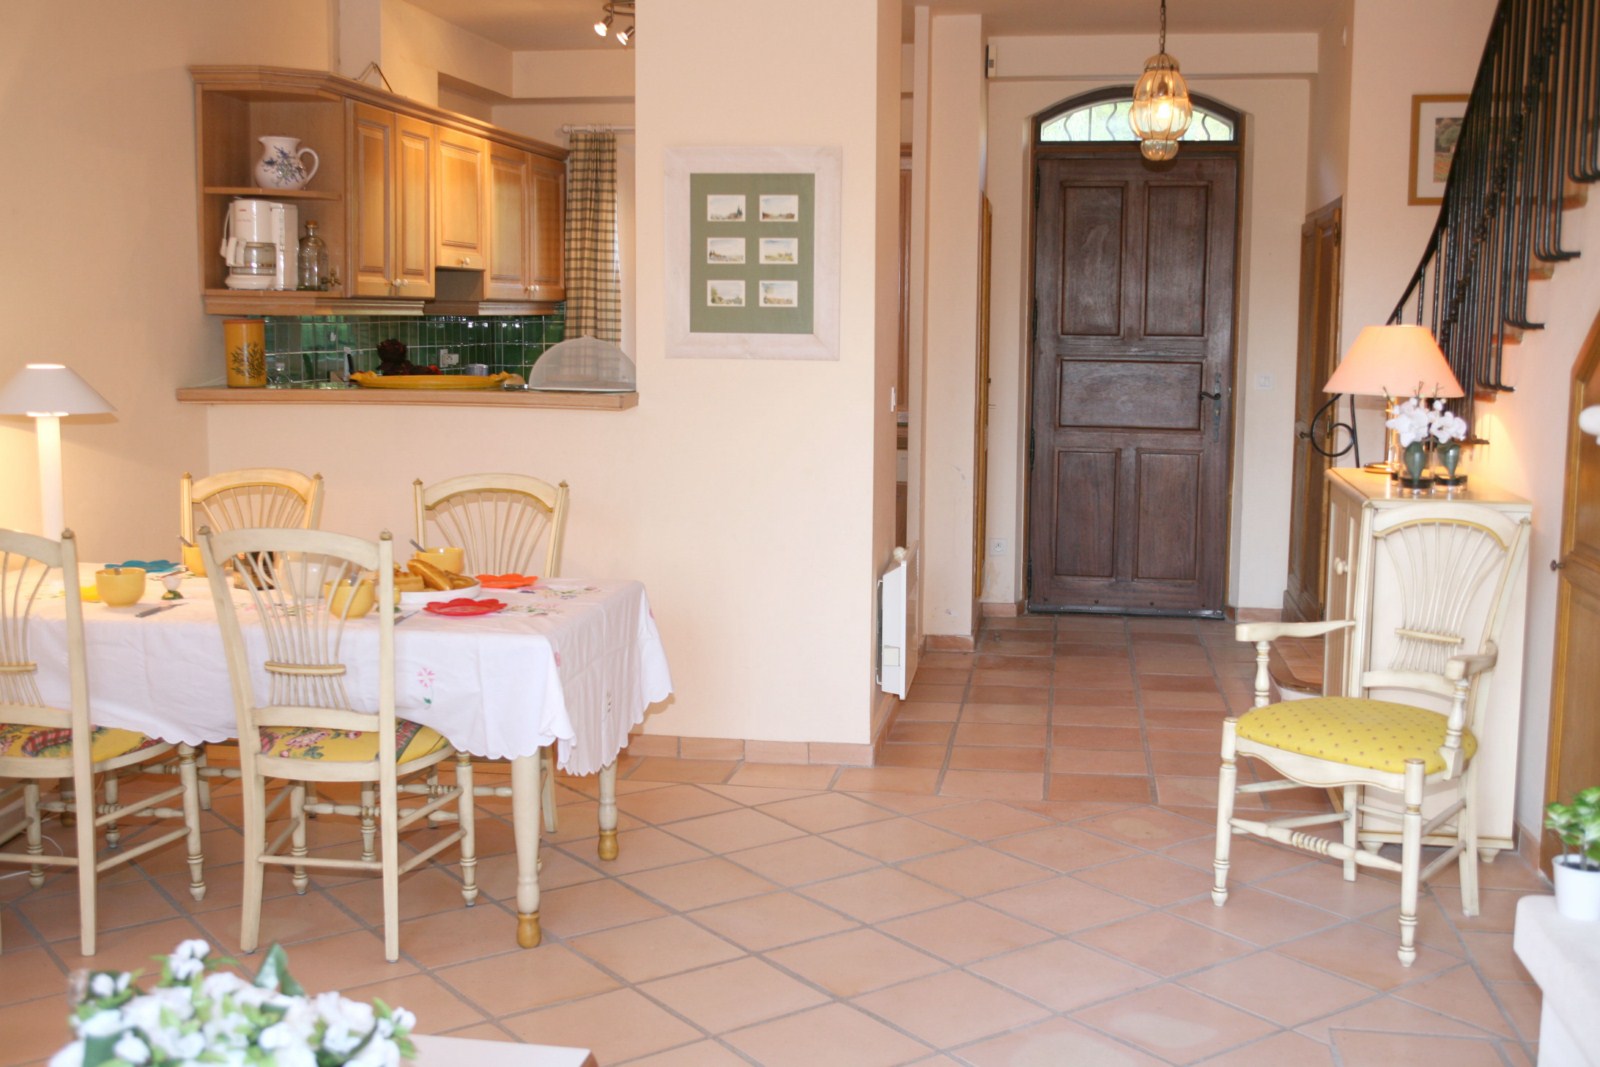 Charming duplex with two bedrooms in a private residence with a pool. In the heart of Provence